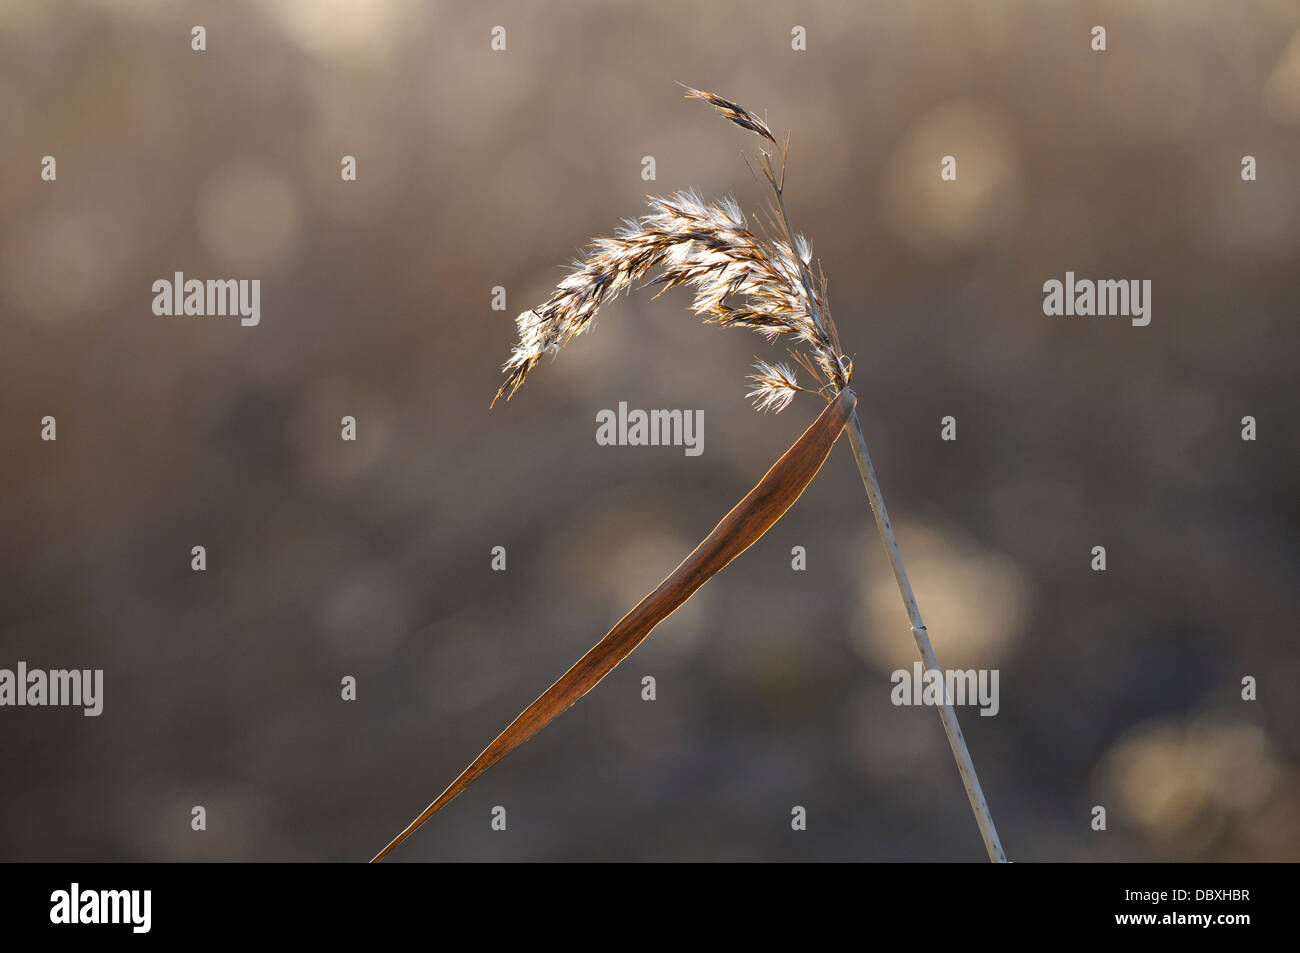 The backlit seed head of a common reed (Phragmites australis) in the reed beds at Crossness Nature Reserve Stock Photo